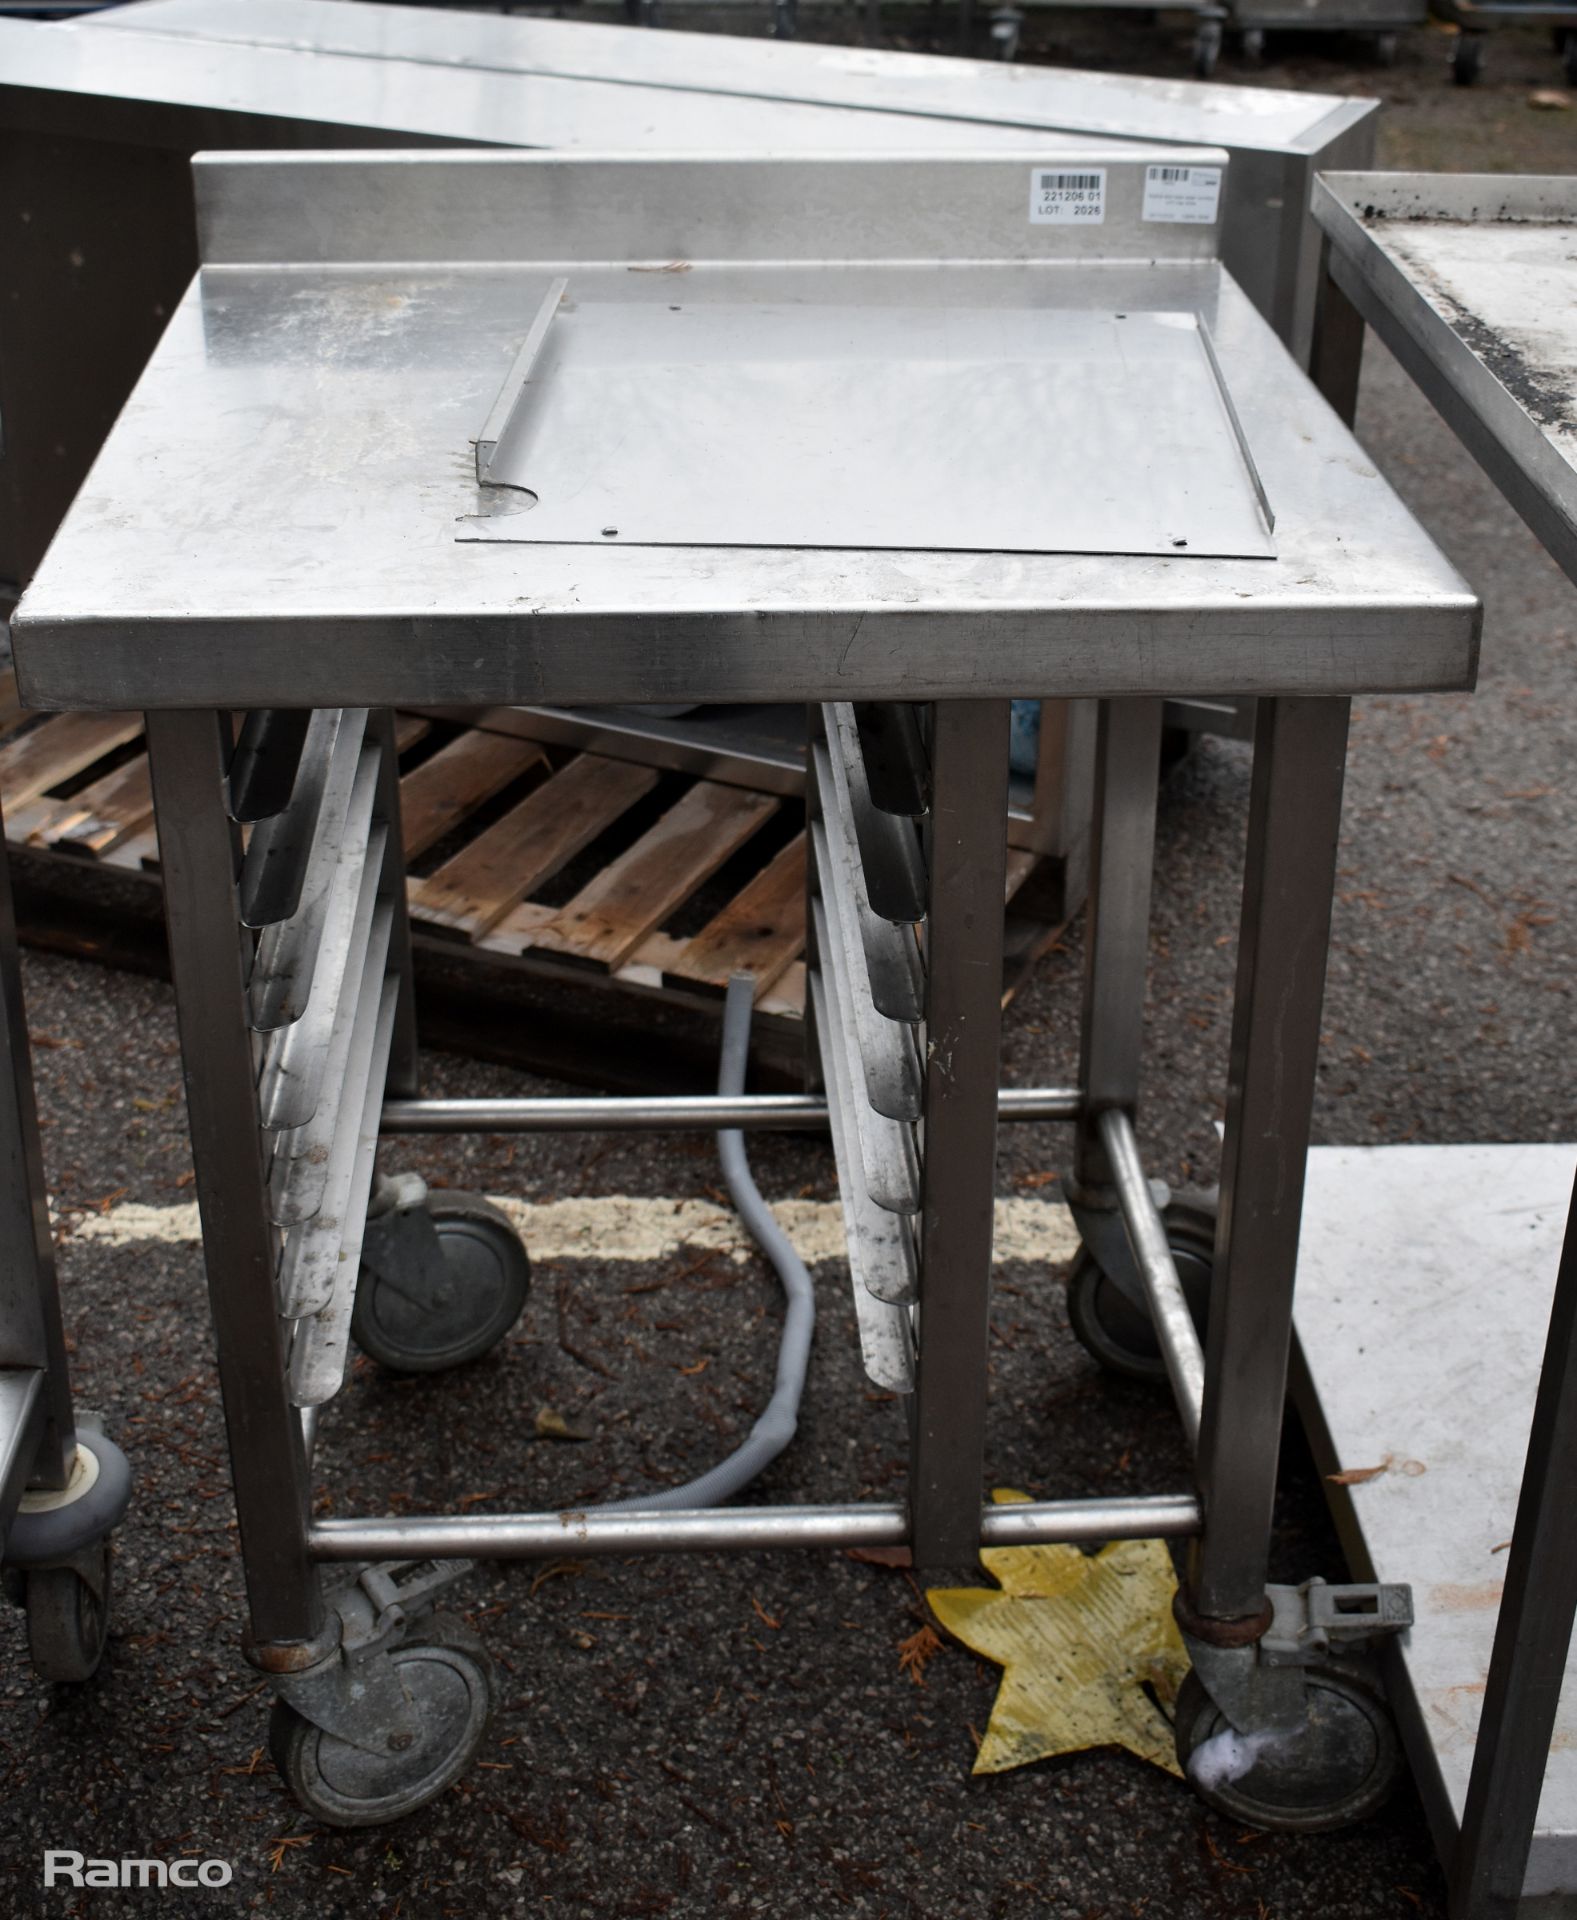 Mobile stainless steel worktop with tray slots